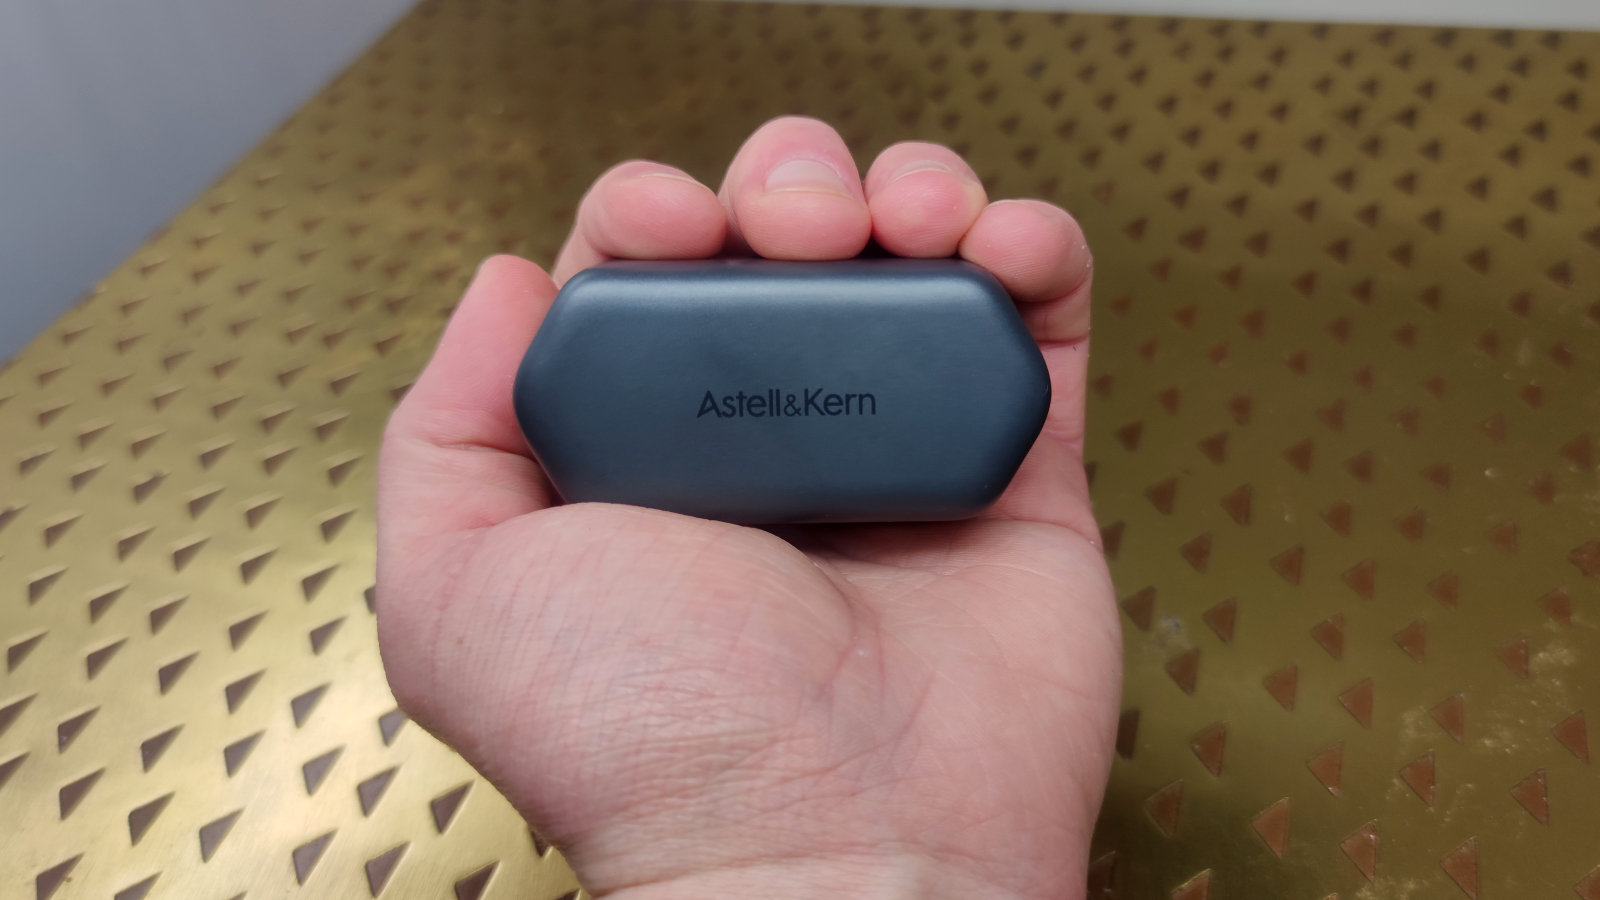 The Astell & Kern AK UW100MKII's charging case held in the palm of a hand.